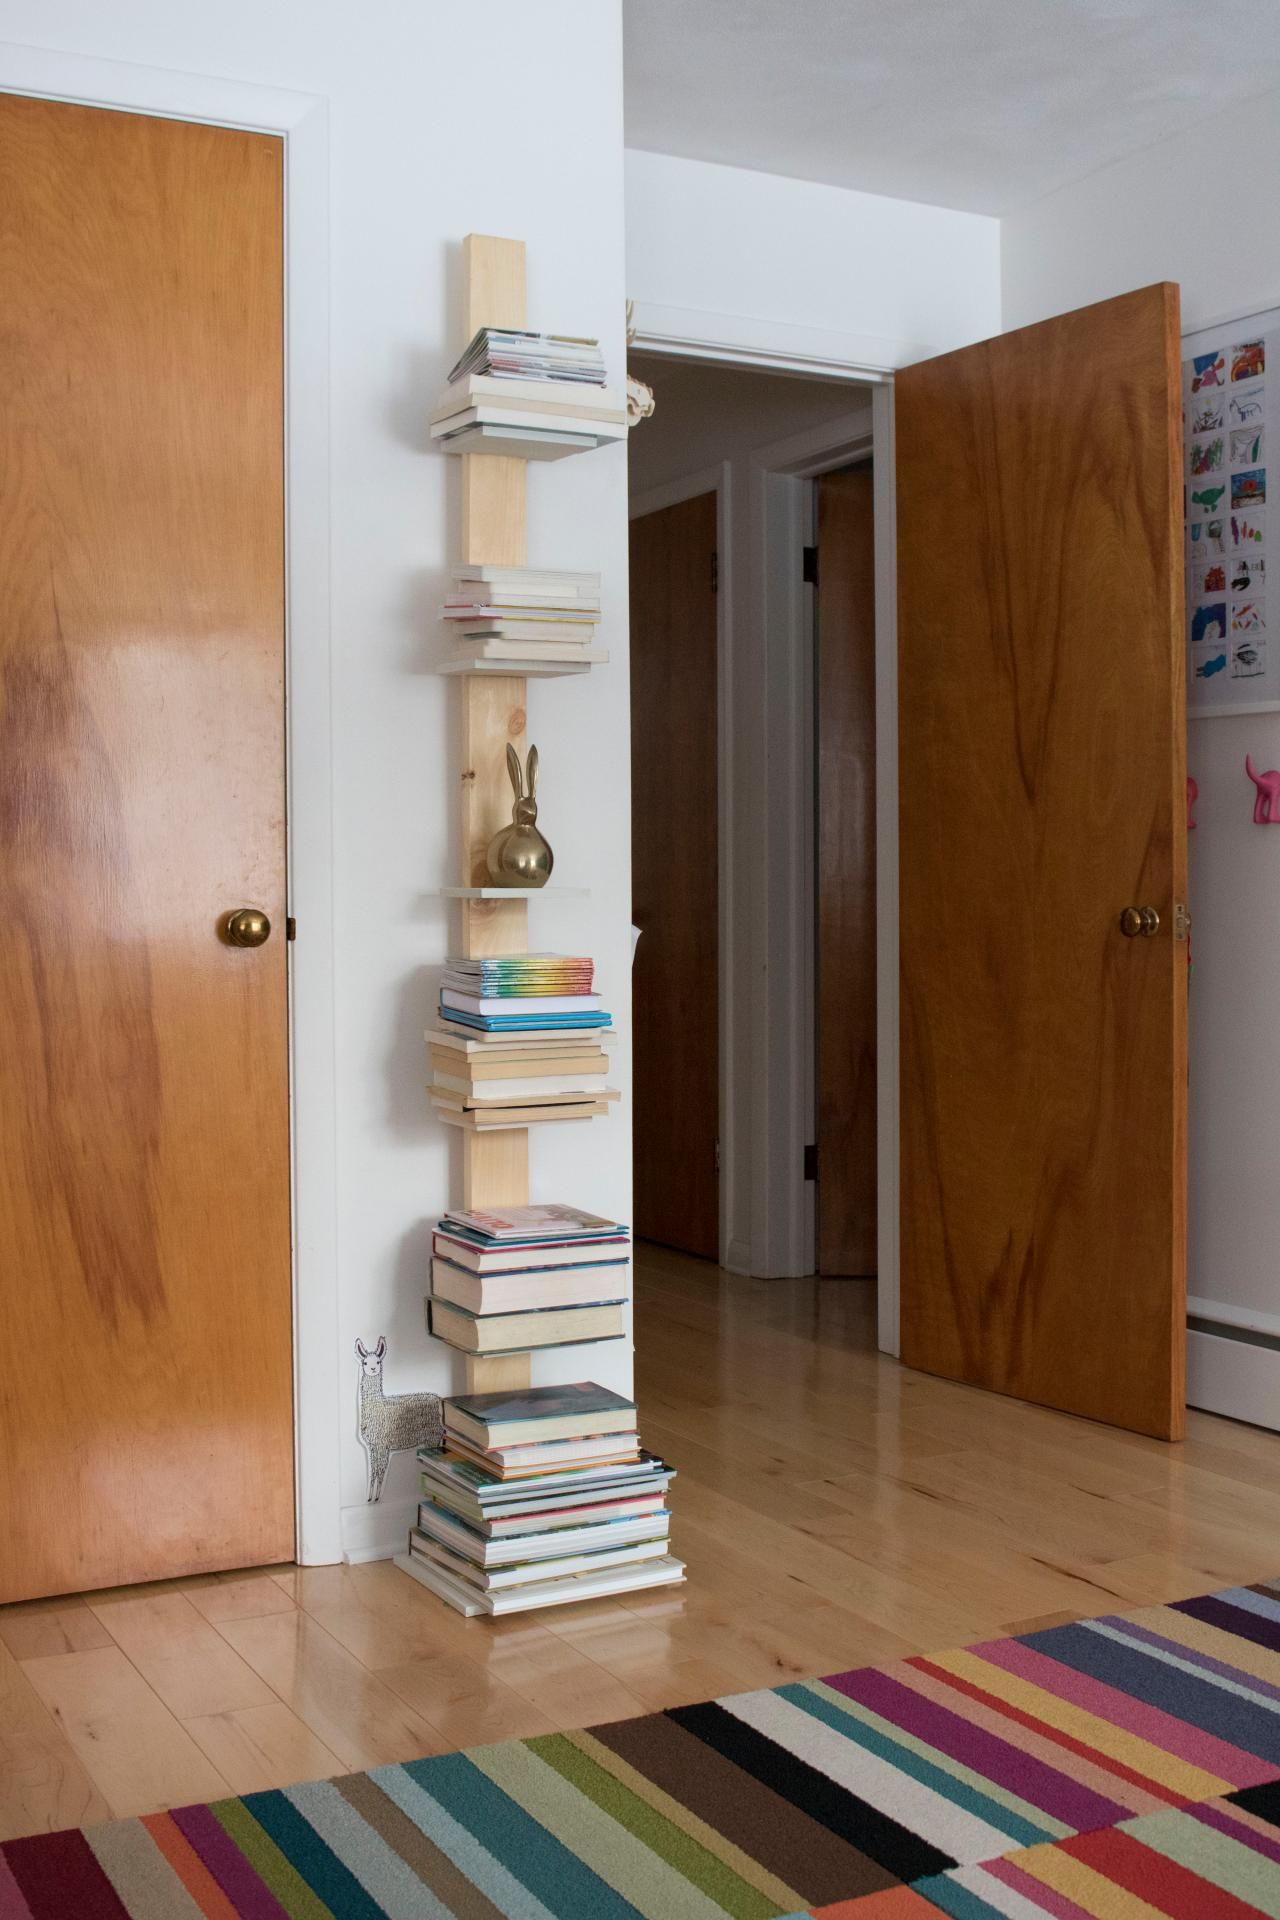 How To Build A Tower Bookshelf | Hgtv In Spine Tower Bookcases (View 3 of 15)